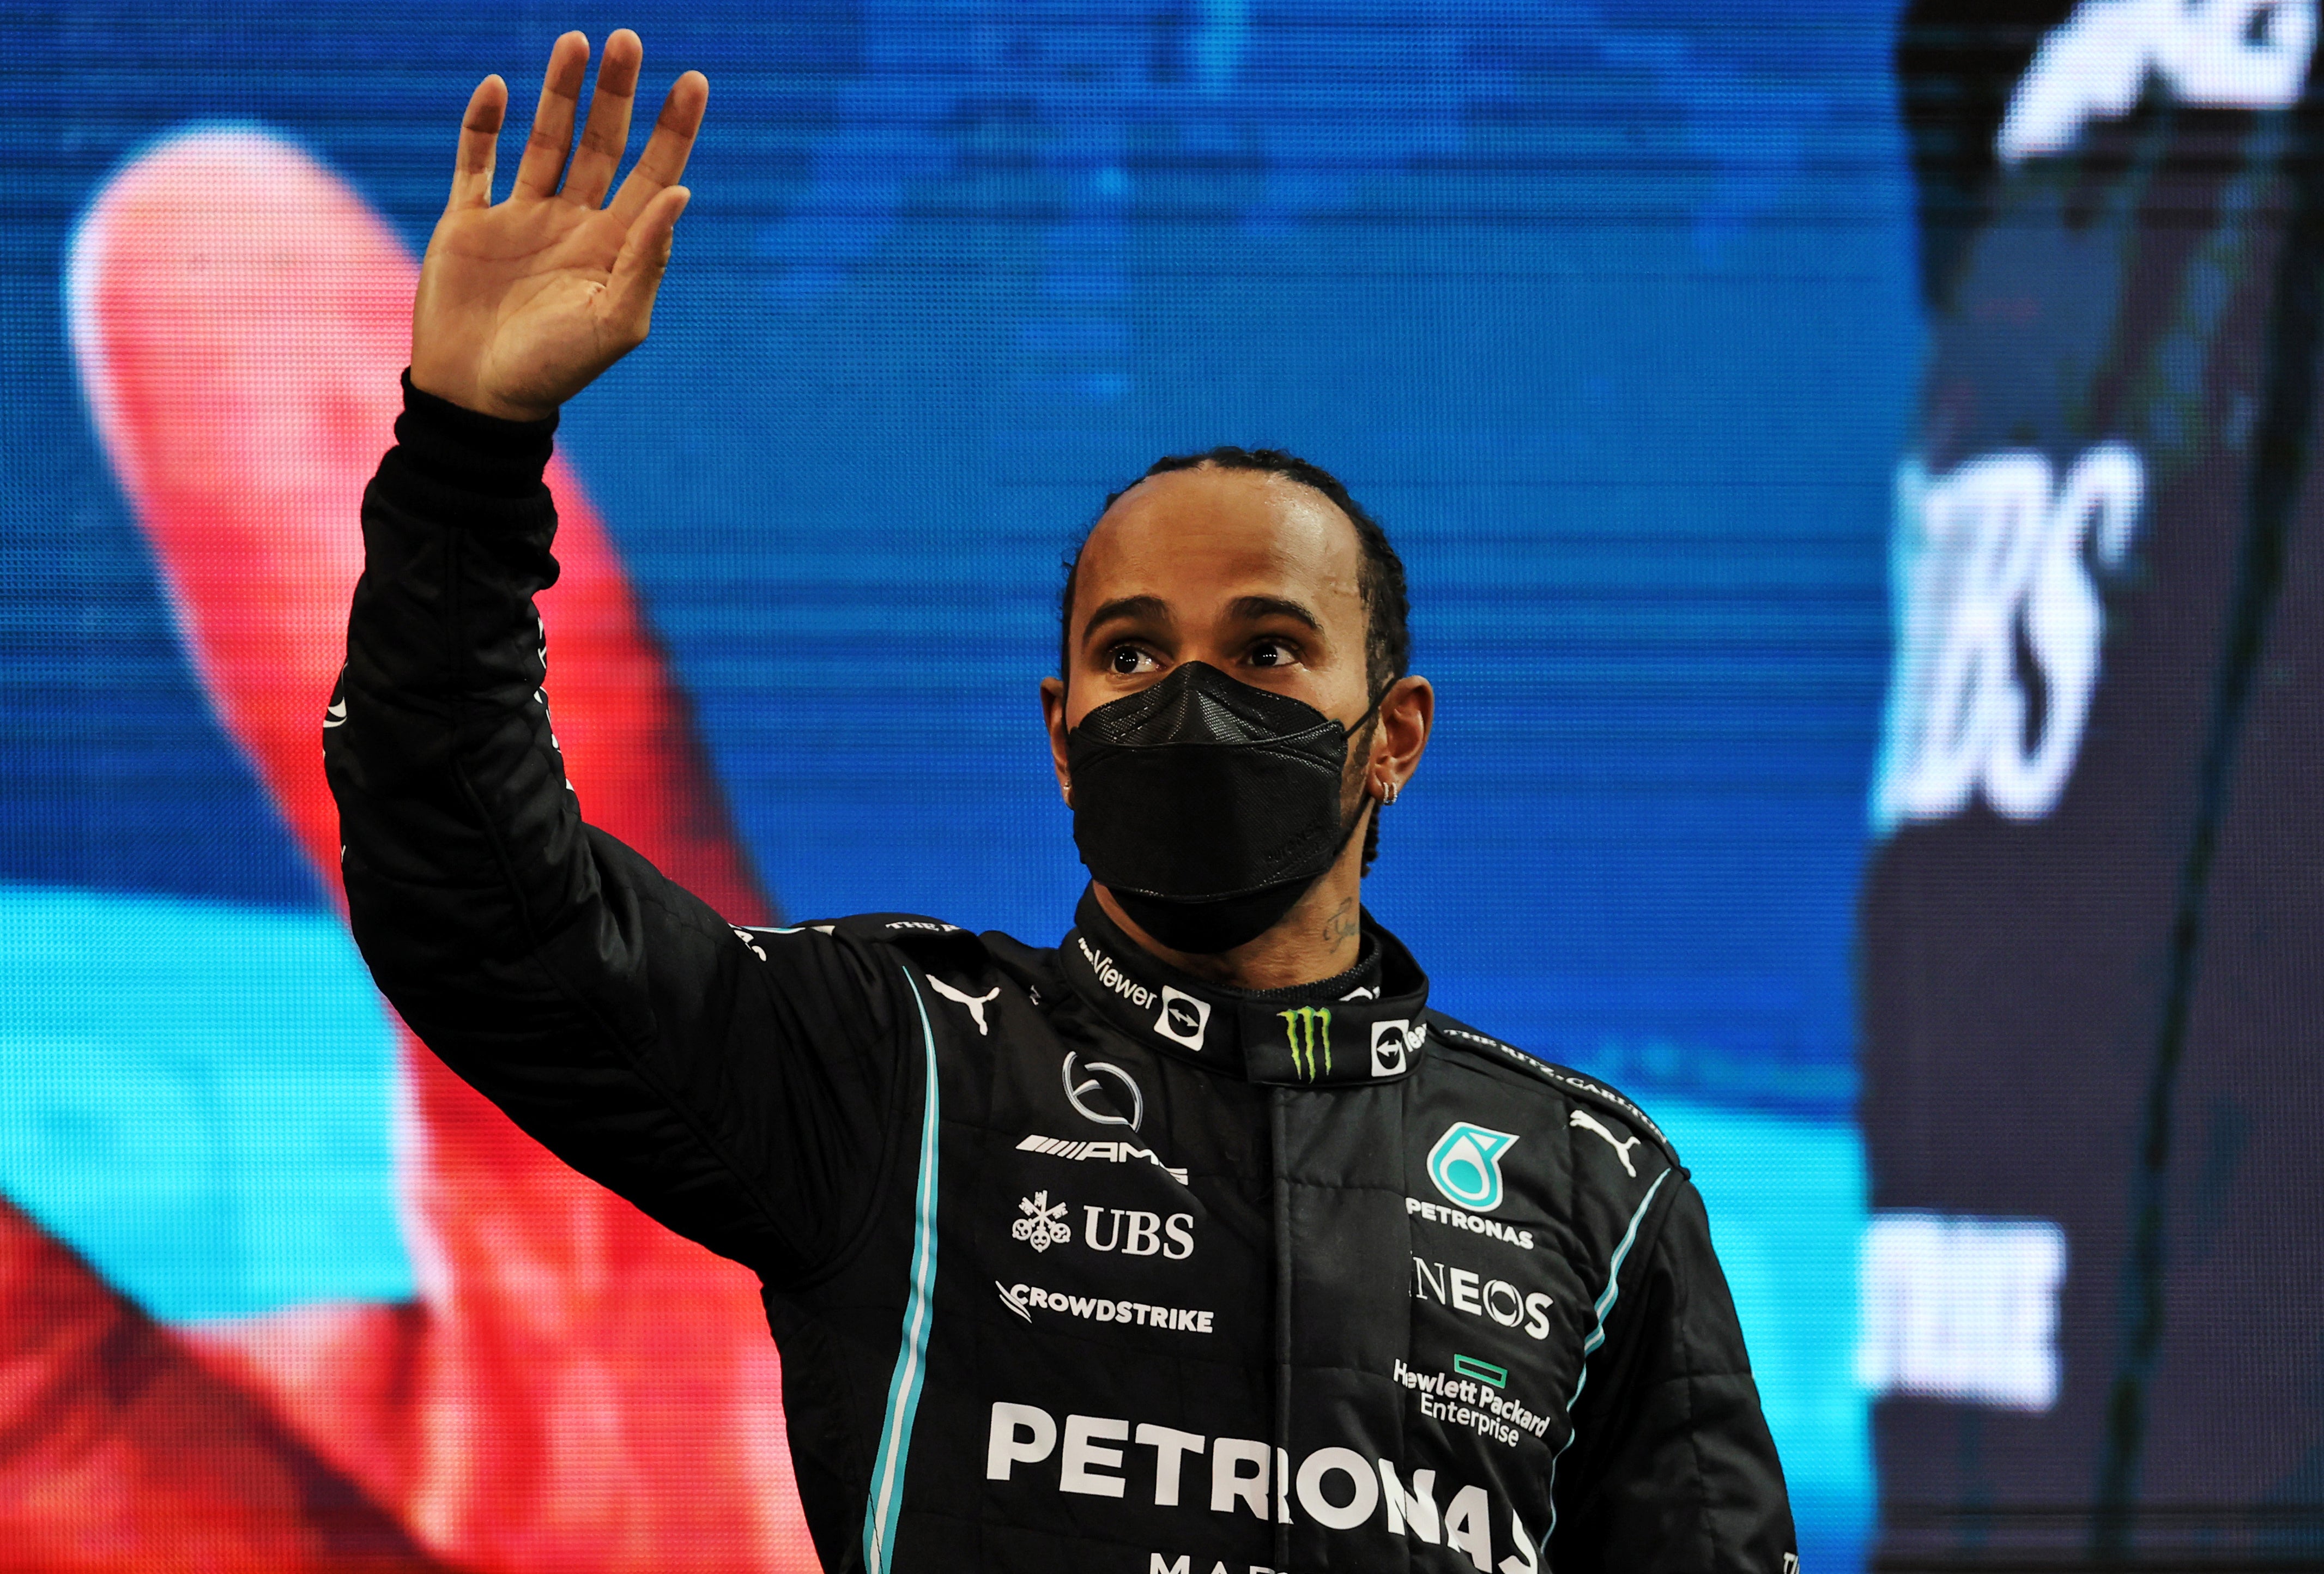 Lewis Hamilton reacts to the crowd after defeat in Abu Dhabi